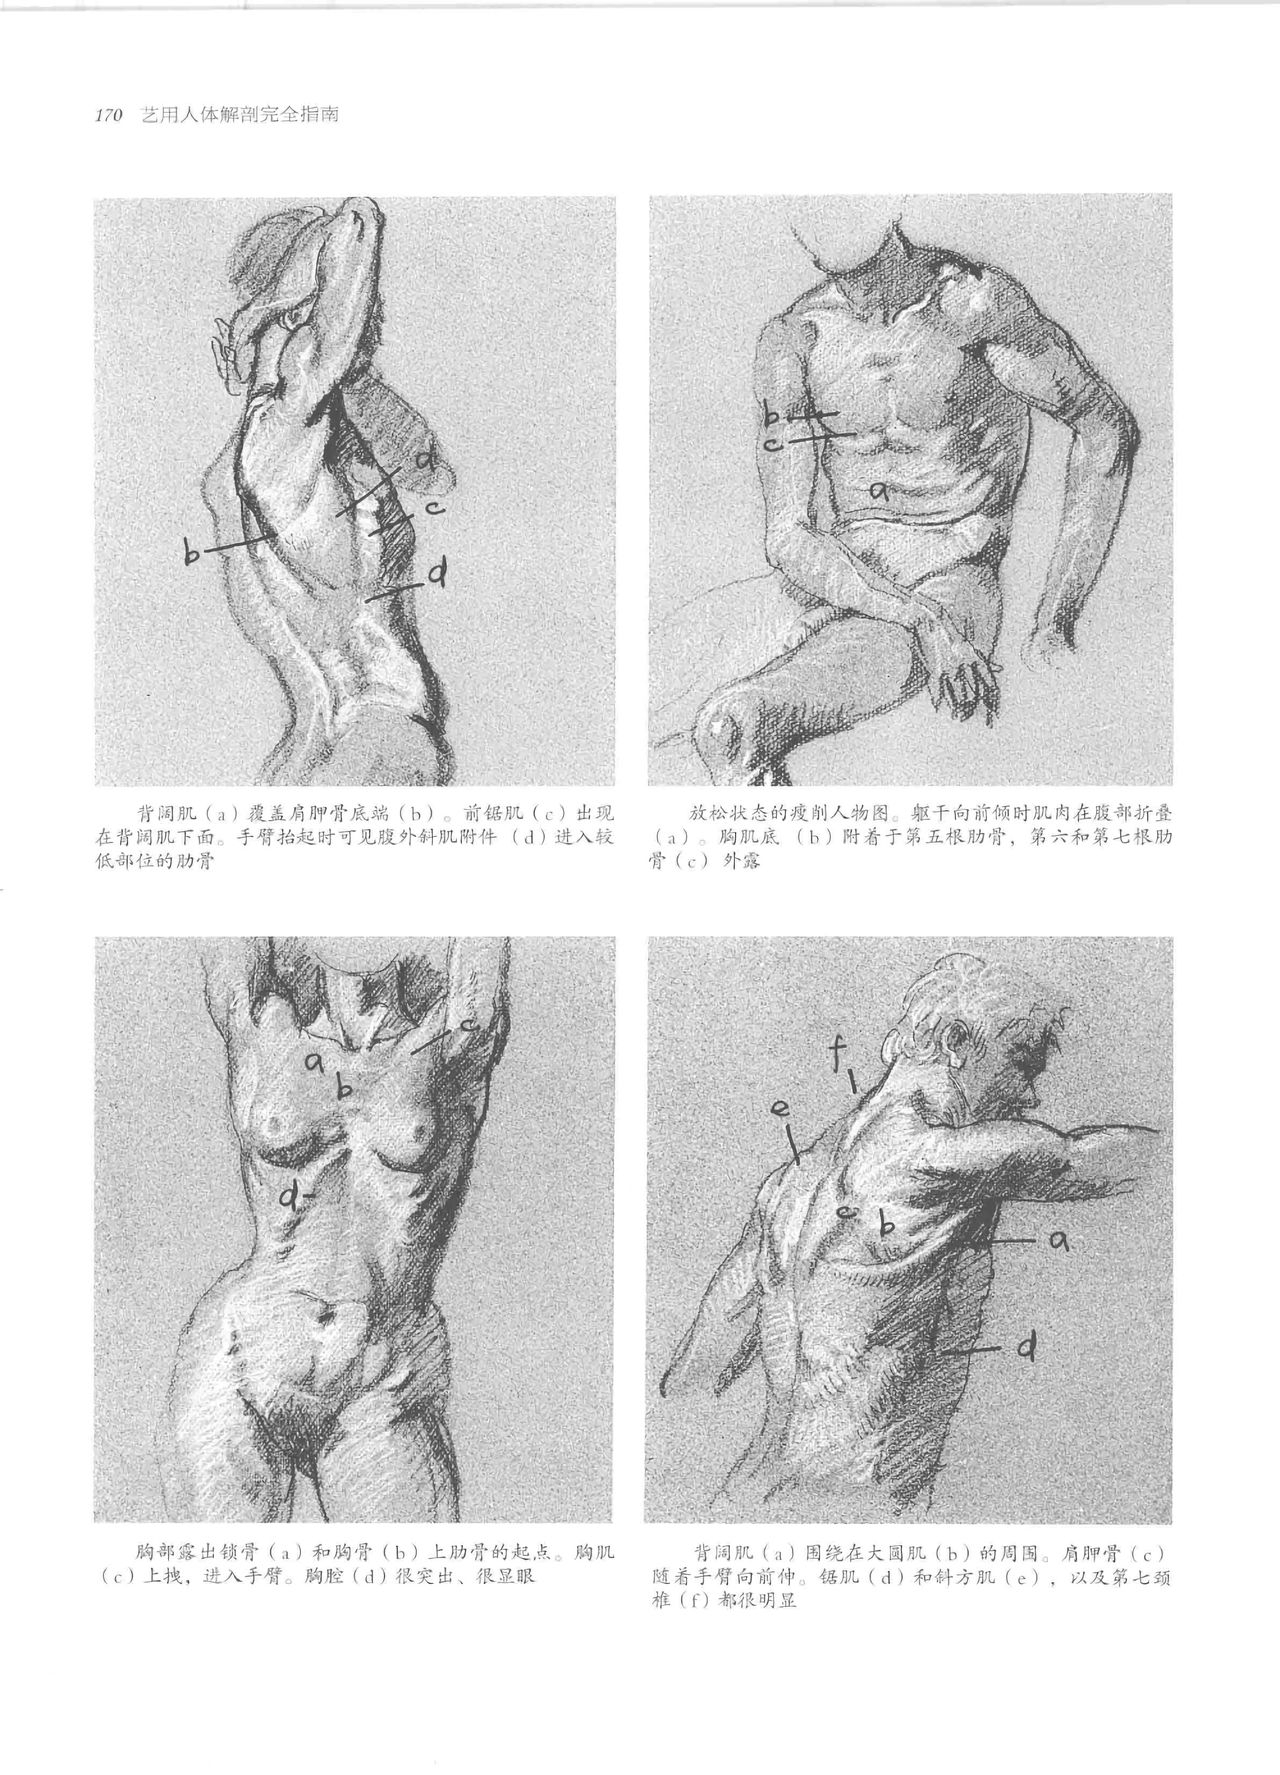 Anatomy-A Complete Guide for Artists - Joseph Sheppard [Chinese] 170